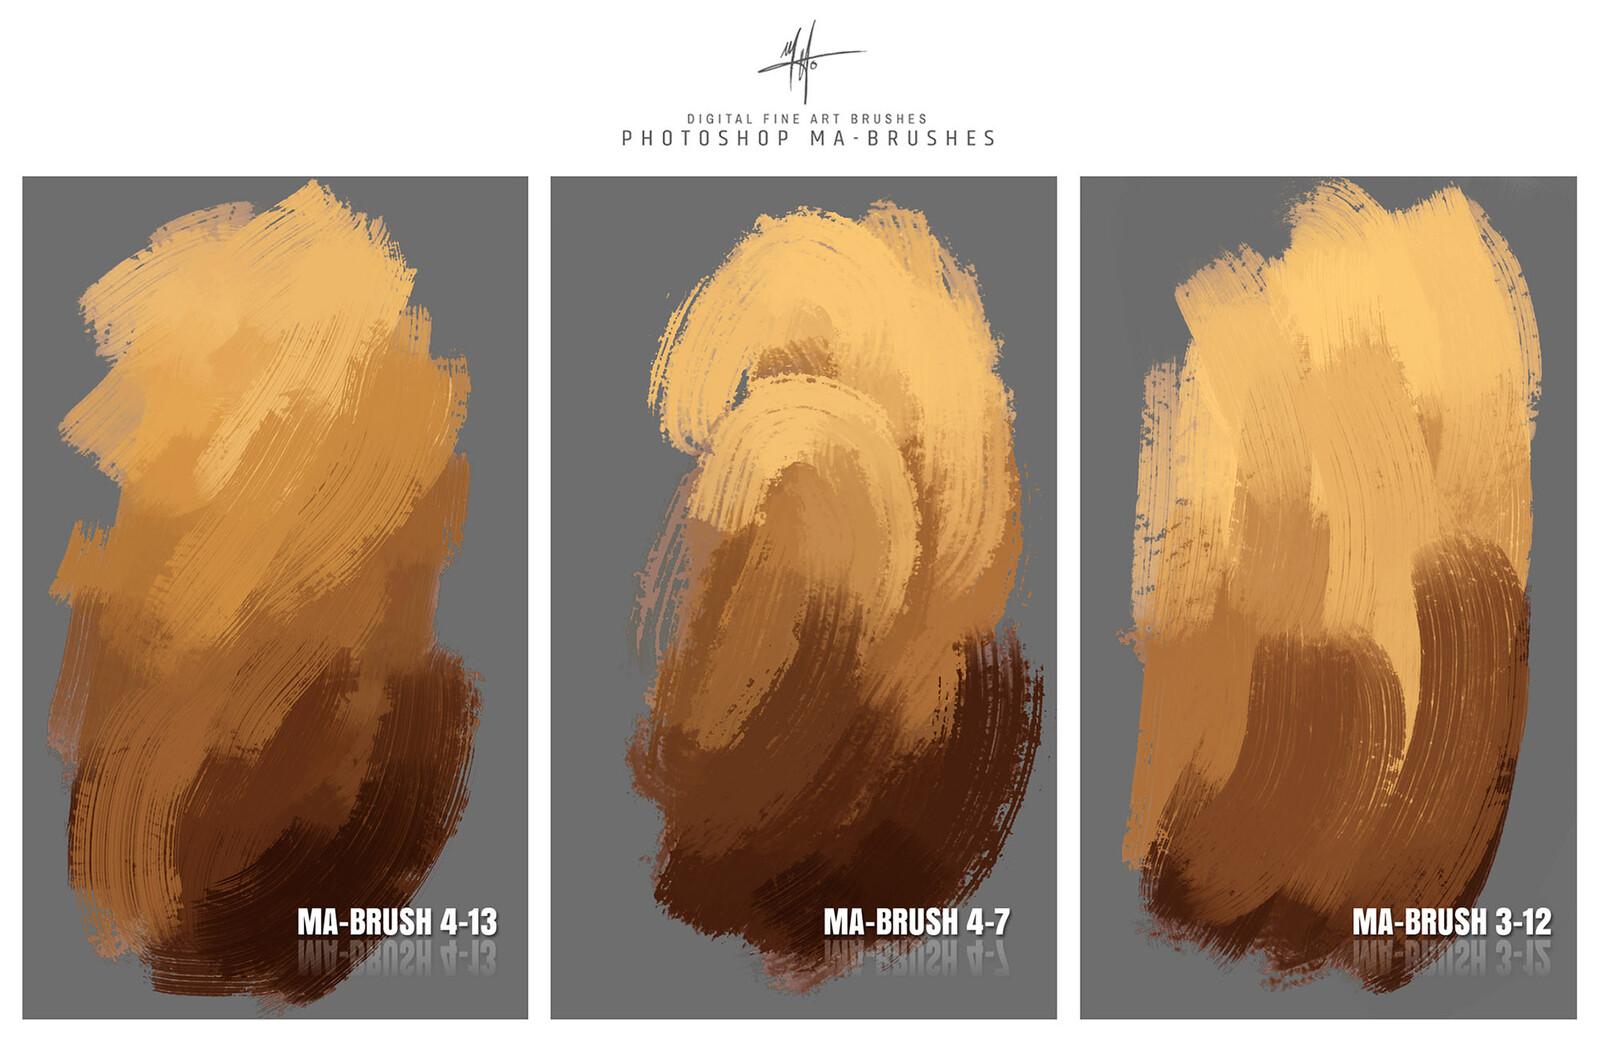 Photoshop Brushes for Digital Art Painting - CLOSE UP!